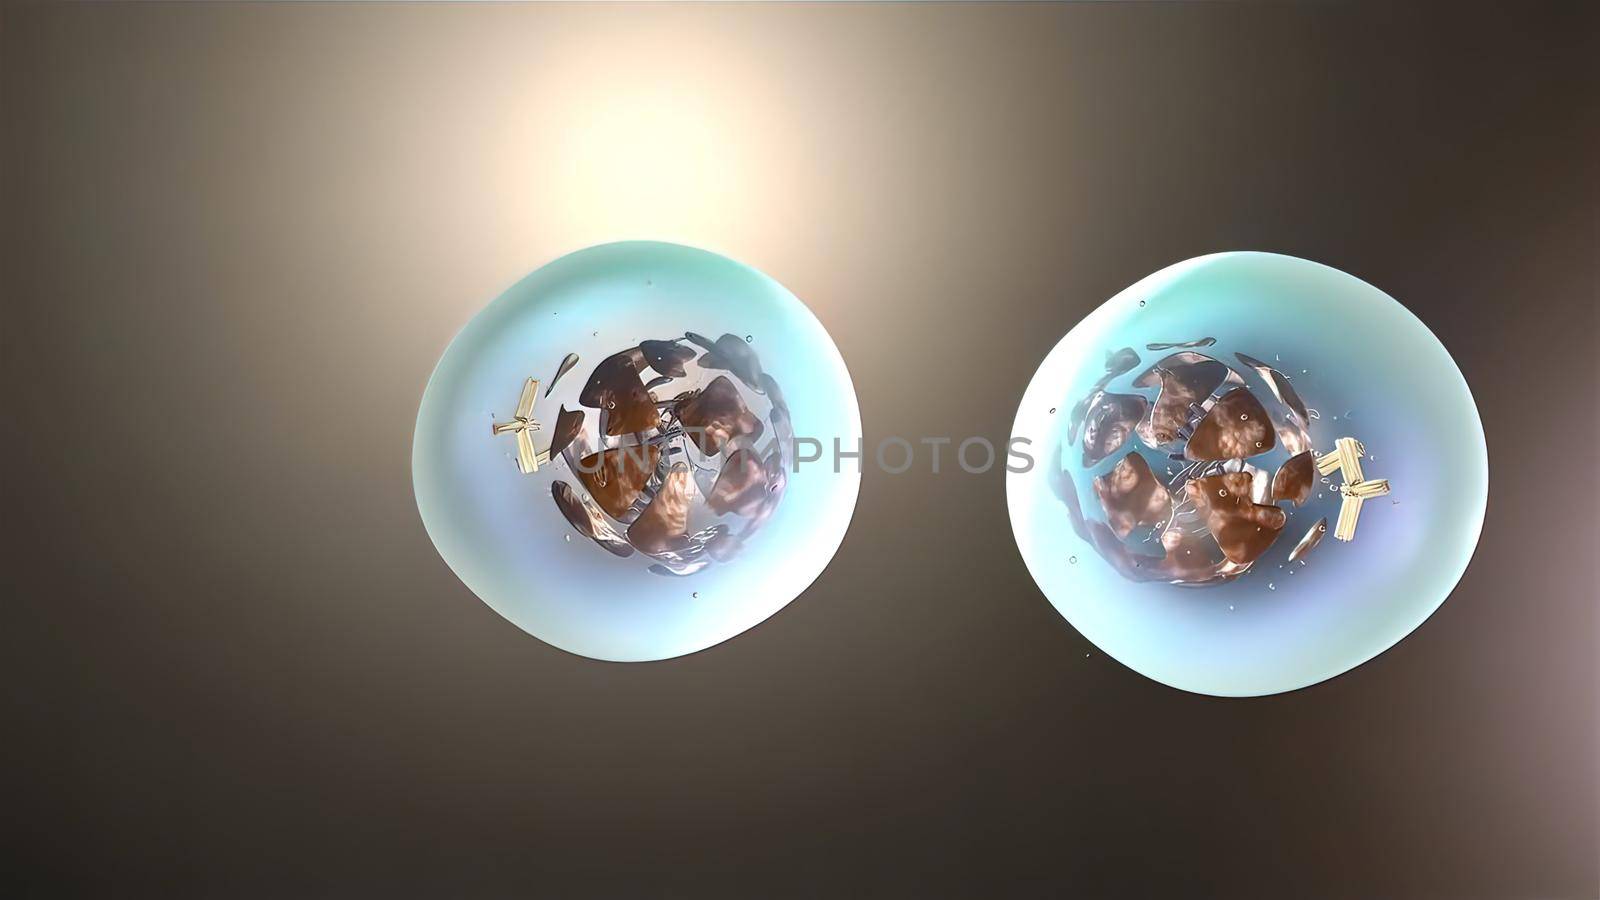 3D Medical illustration of cell division, mitosis by creativepic